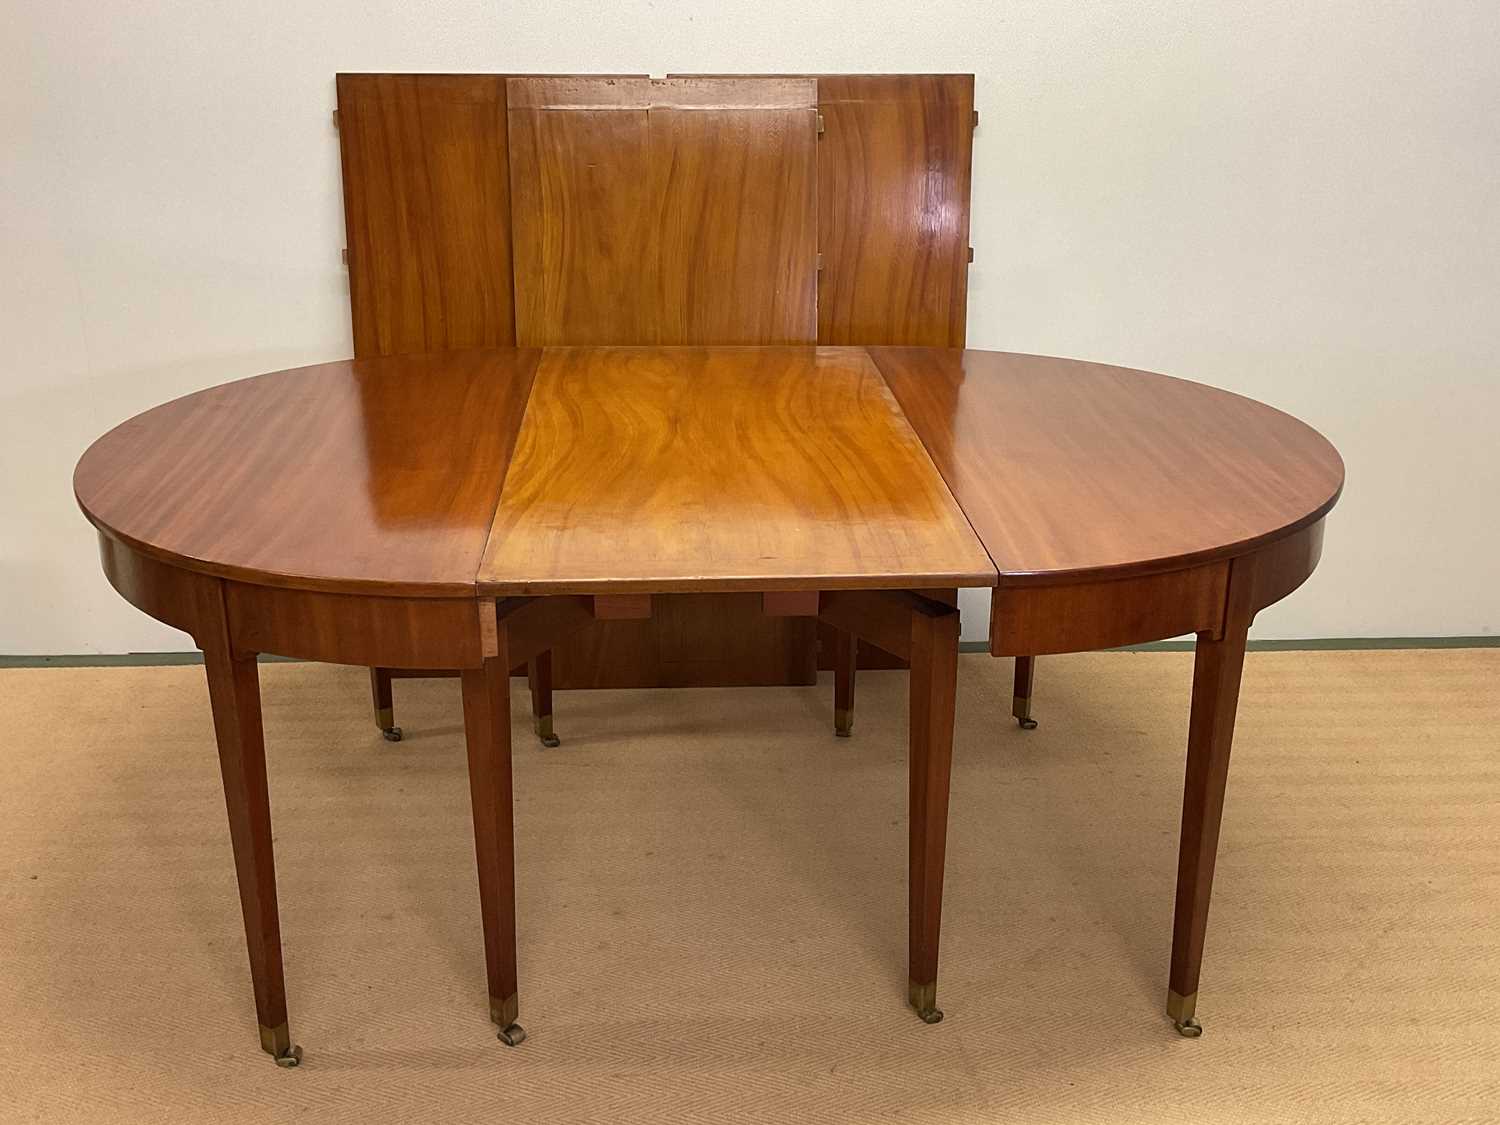 KAARE KLINT FOR RUD RASMUSSEN; a Danish early 20th century circular dining table, with paper label - Image 7 of 9